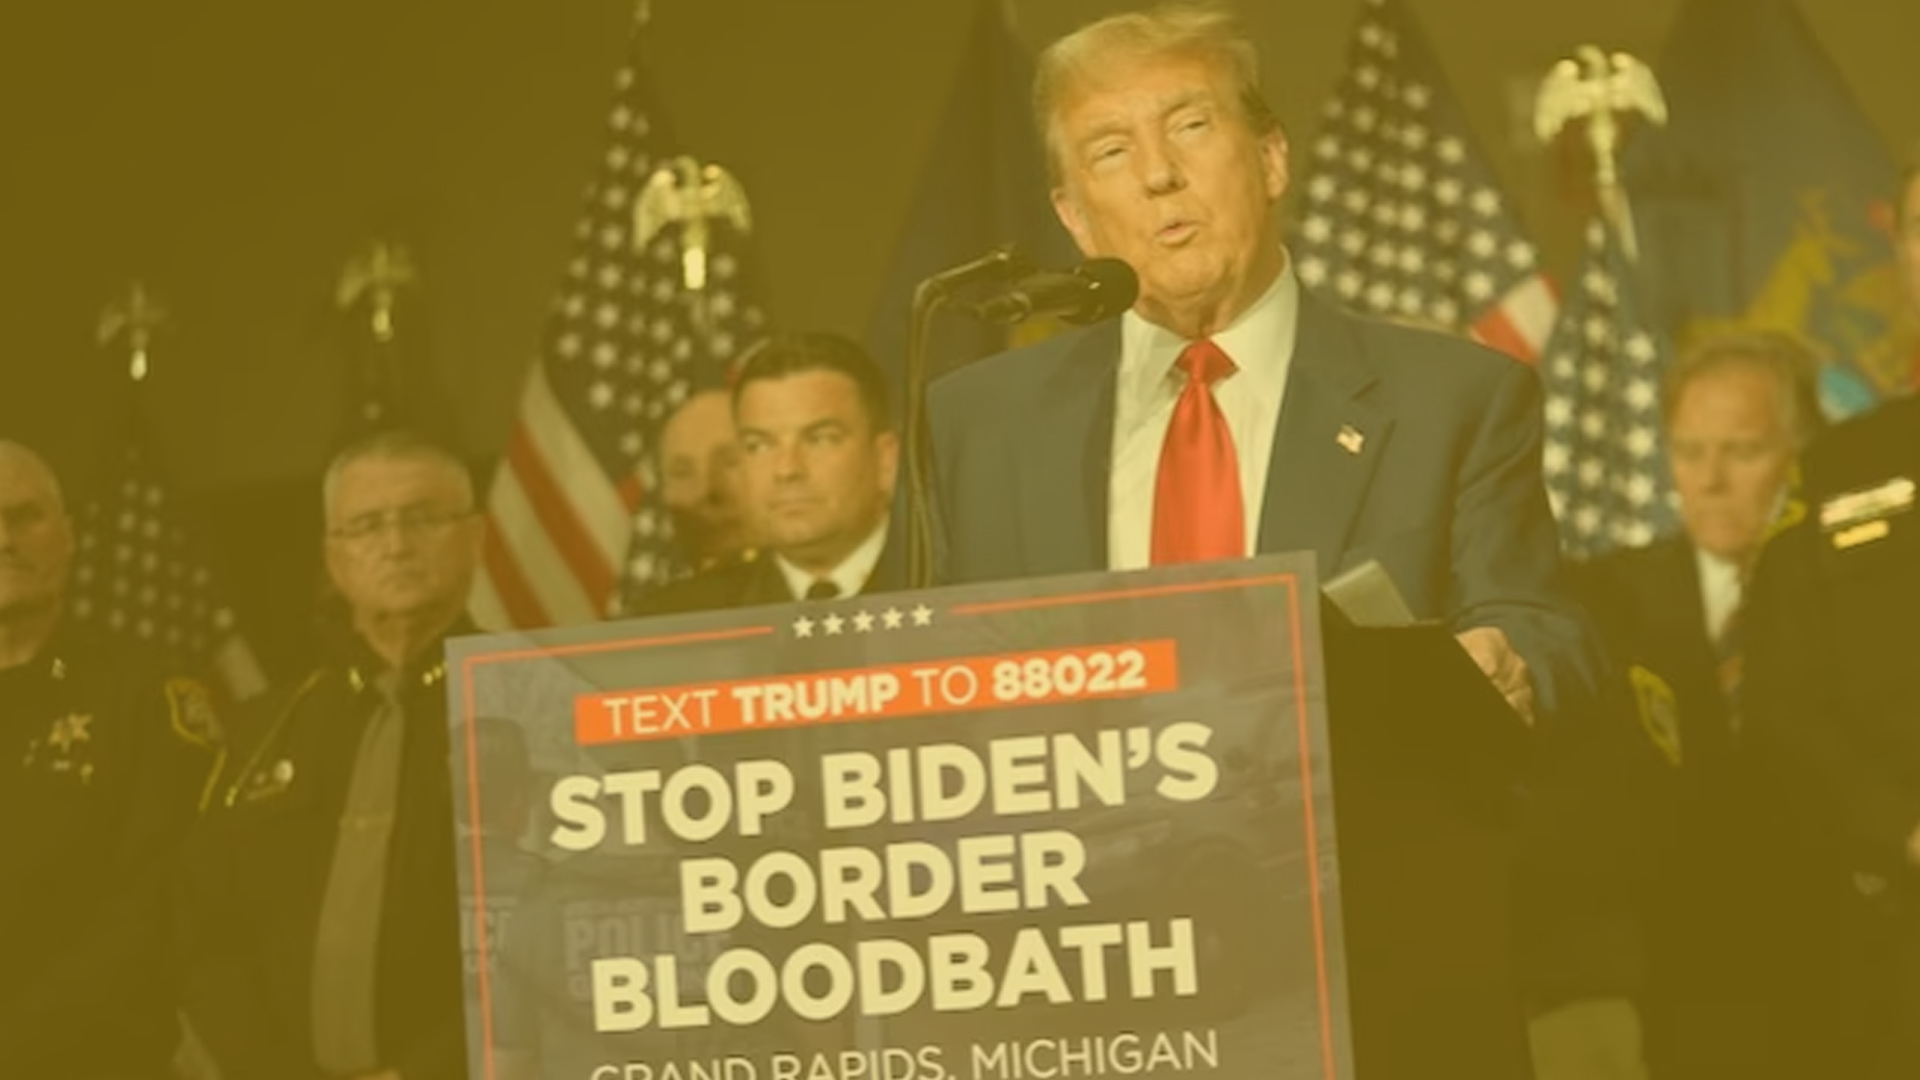 The Mike Church Show-Trump Vows Justice For Another Child Slain By Biden’s Border Bloodbath